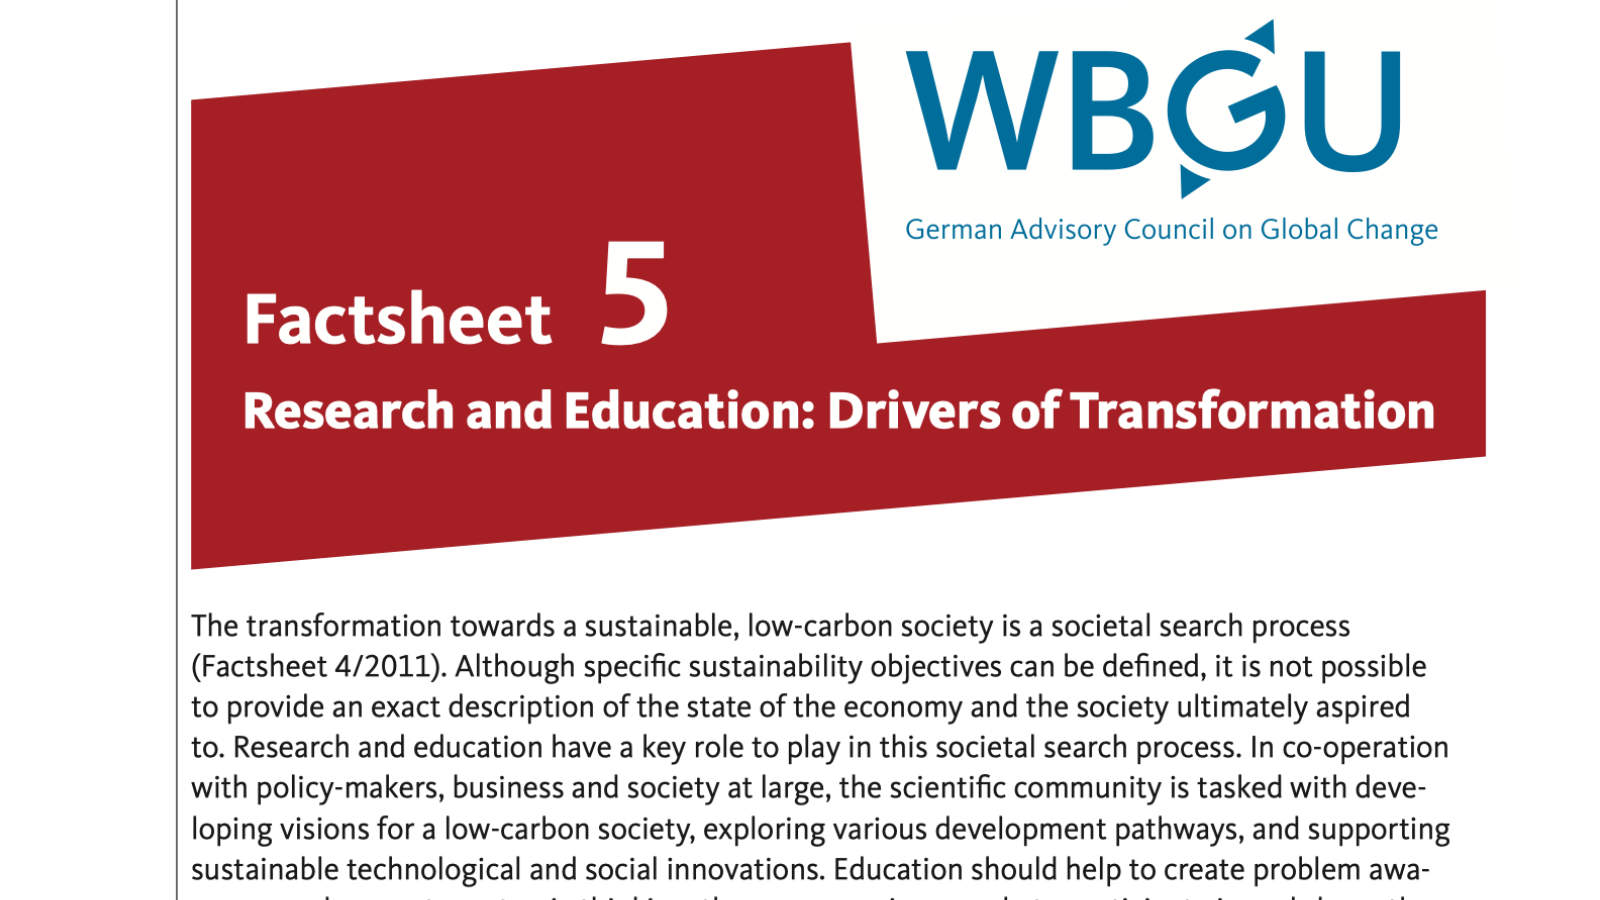 Factsheet: Research and Education - Drivers of Transformation